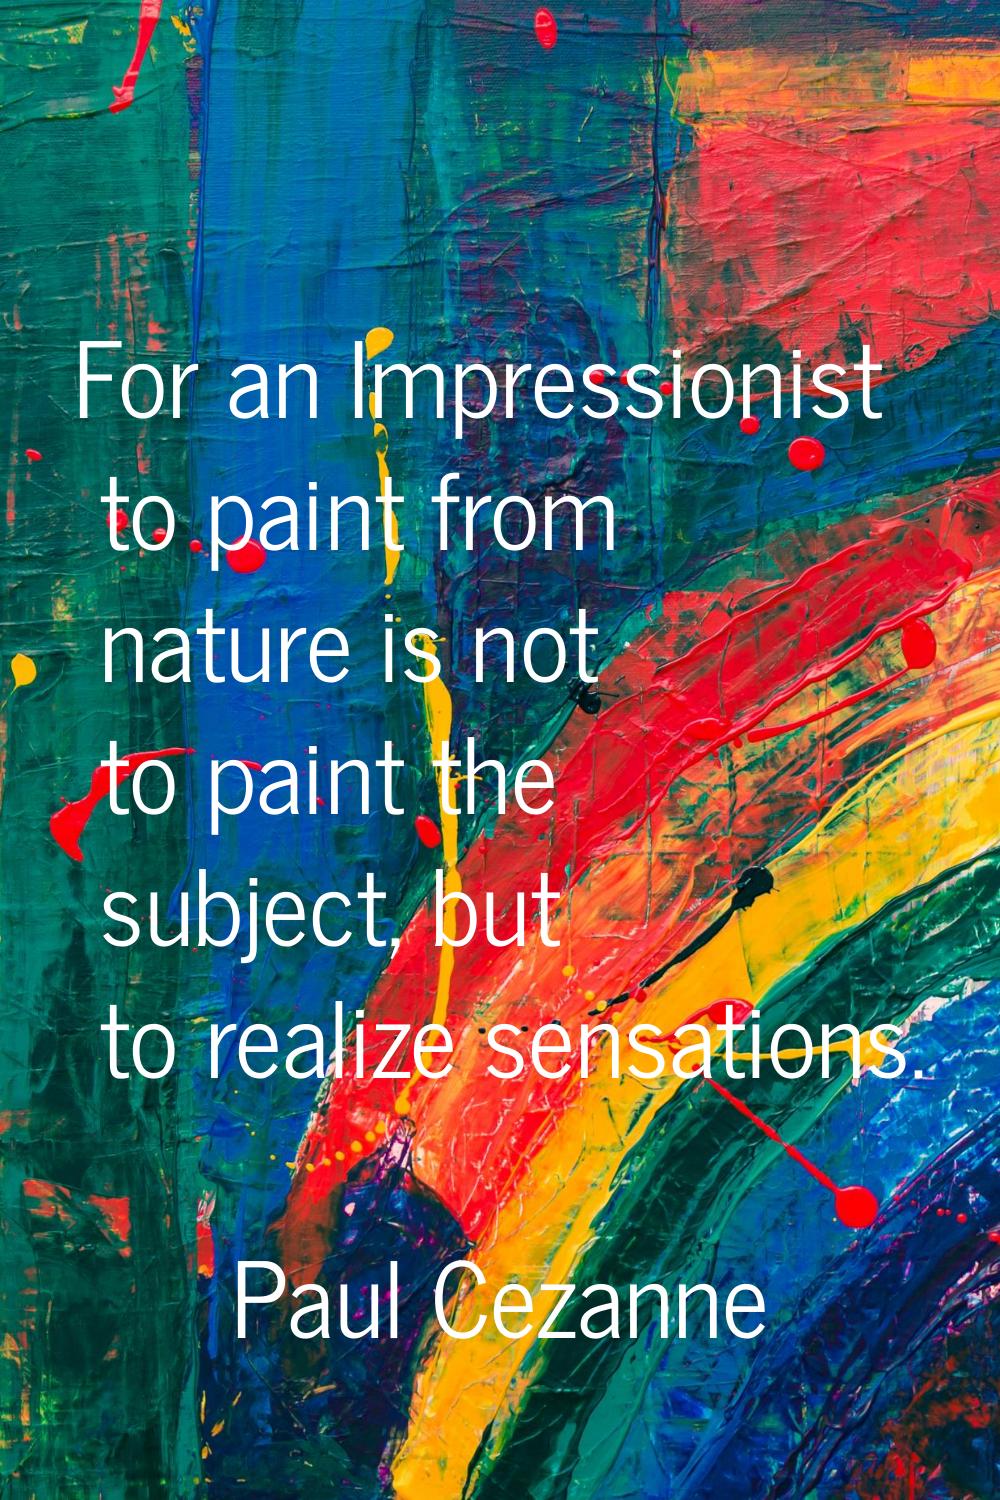 For an Impressionist to paint from nature is not to paint the subject, but to realize sensations.